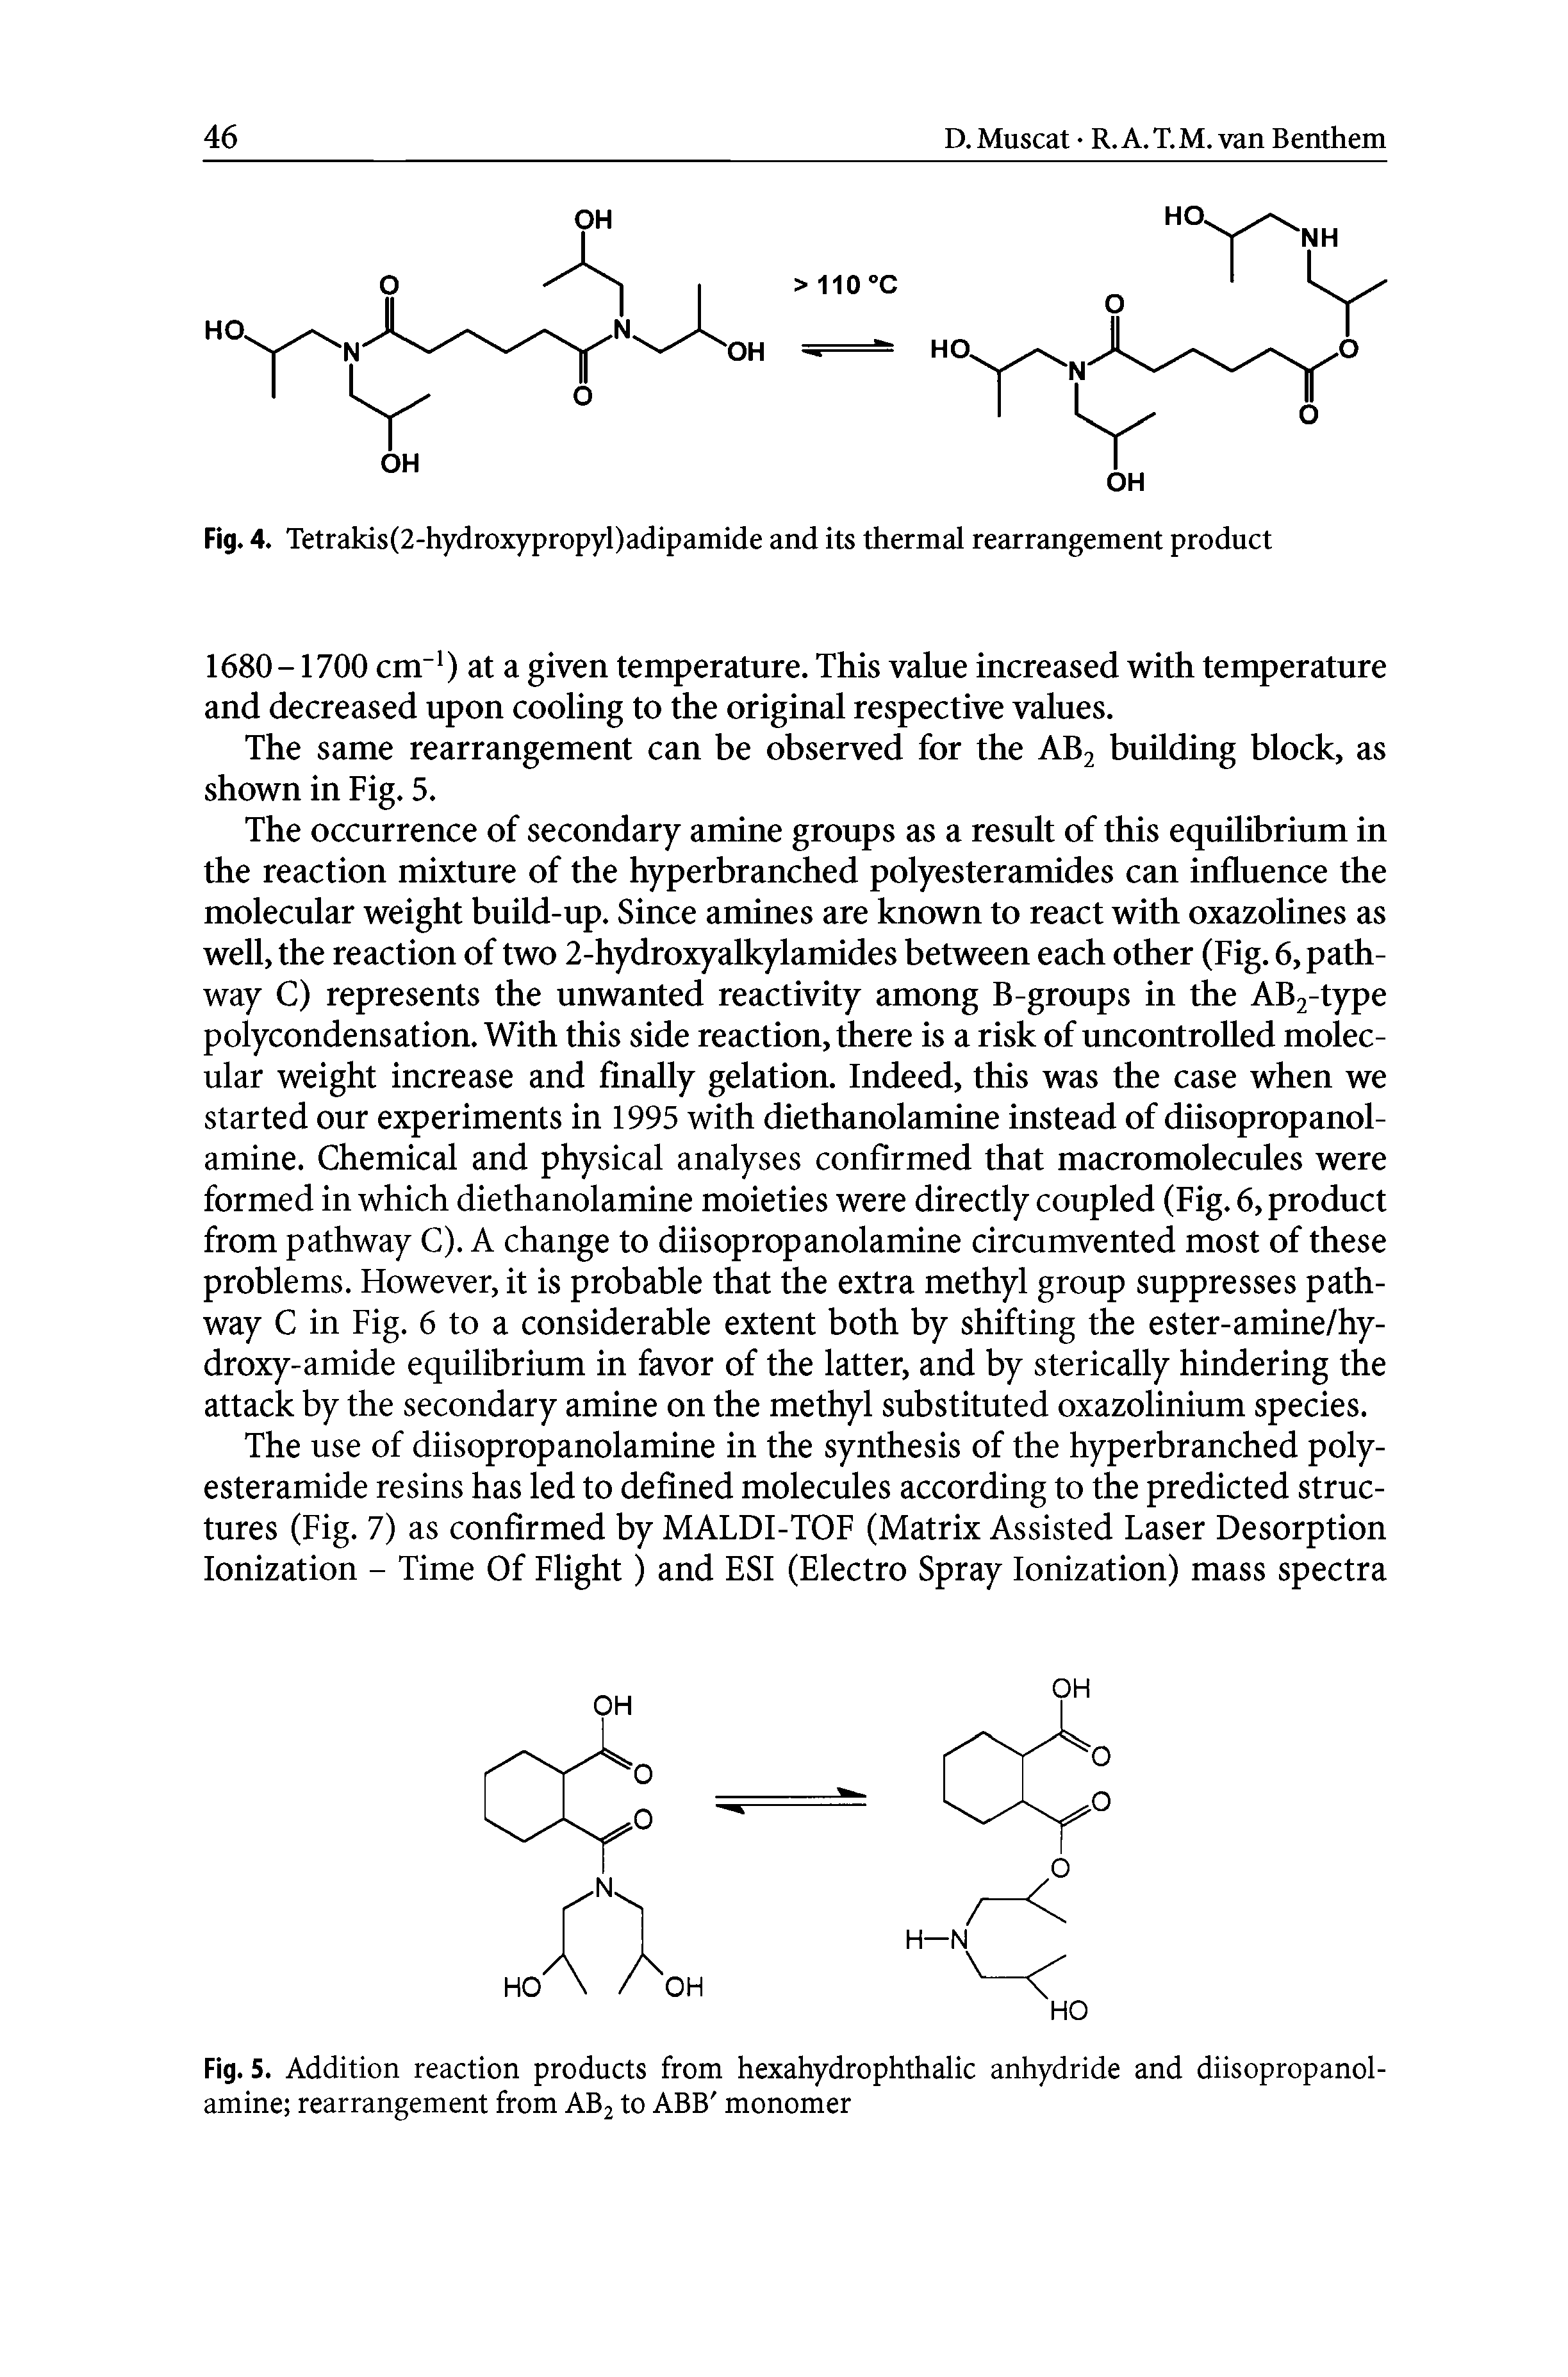 Fig. 5. Addition reaction products from hexahydrophthalic anhydride and diisopropanol-amine rearrangement from AB2 to ABB monomer...